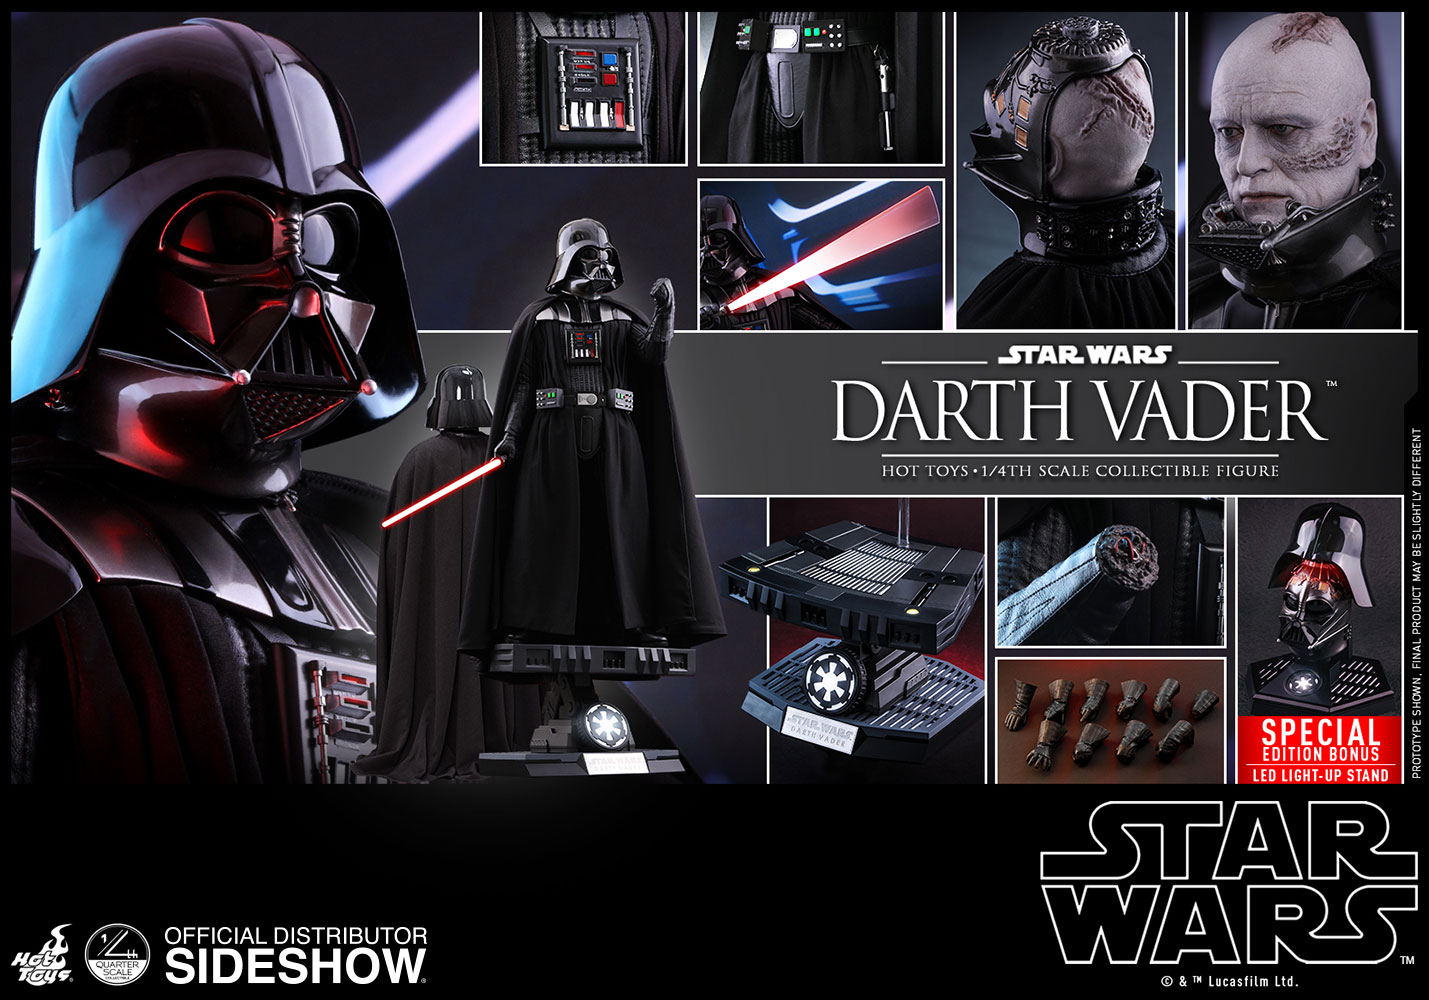 Star wars darth vader hot toys ak discovery ep 2017 24bit